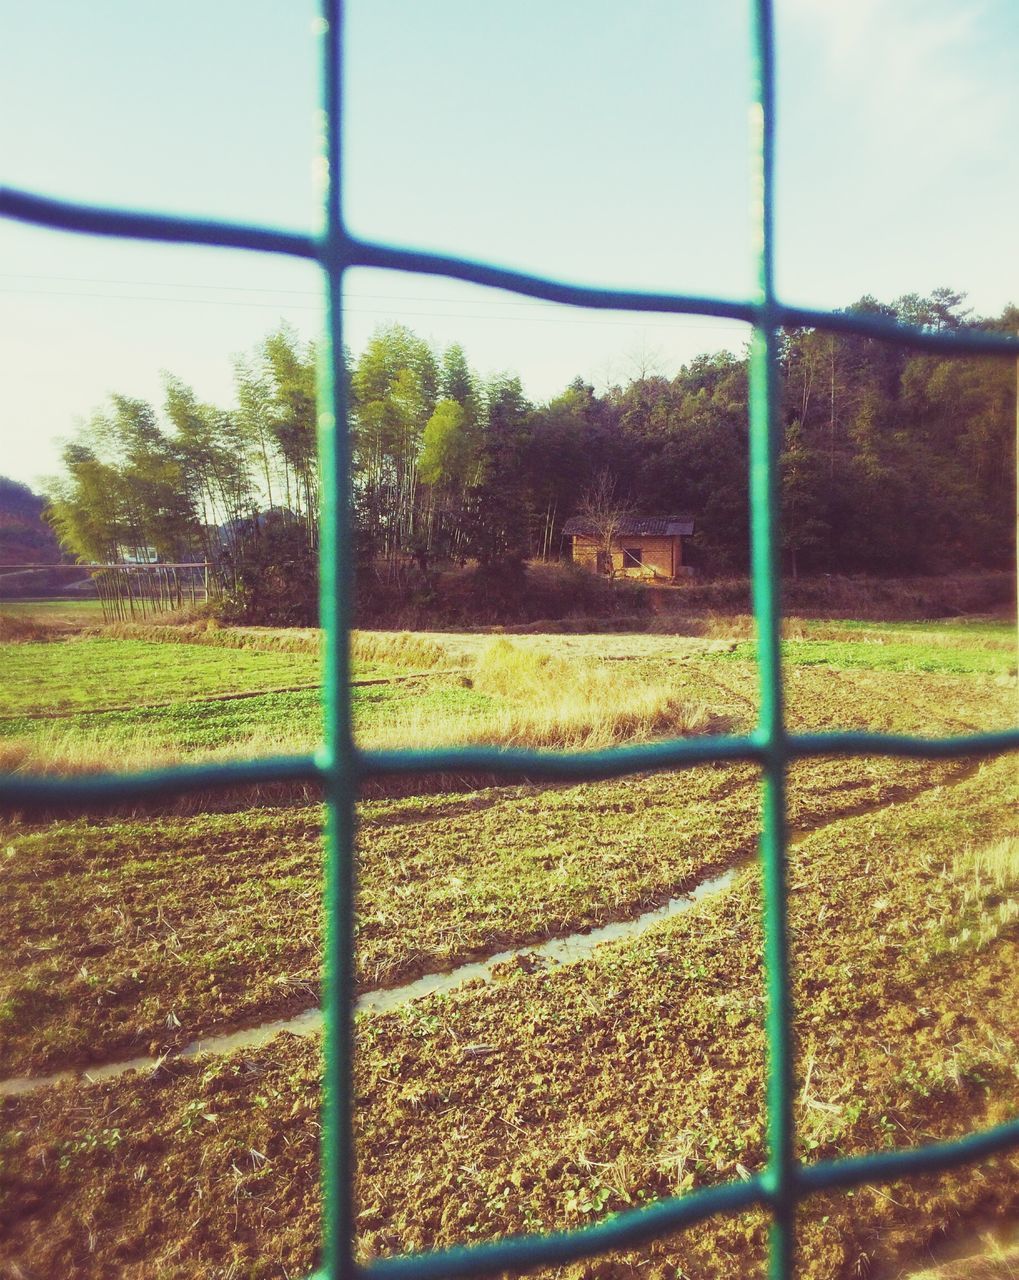 fence, field, grass, green color, tree, landscape, sky, growth, chainlink fence, protection, tranquility, grassy, tranquil scene, nature, day, rural scene, safety, metal, green, outdoors